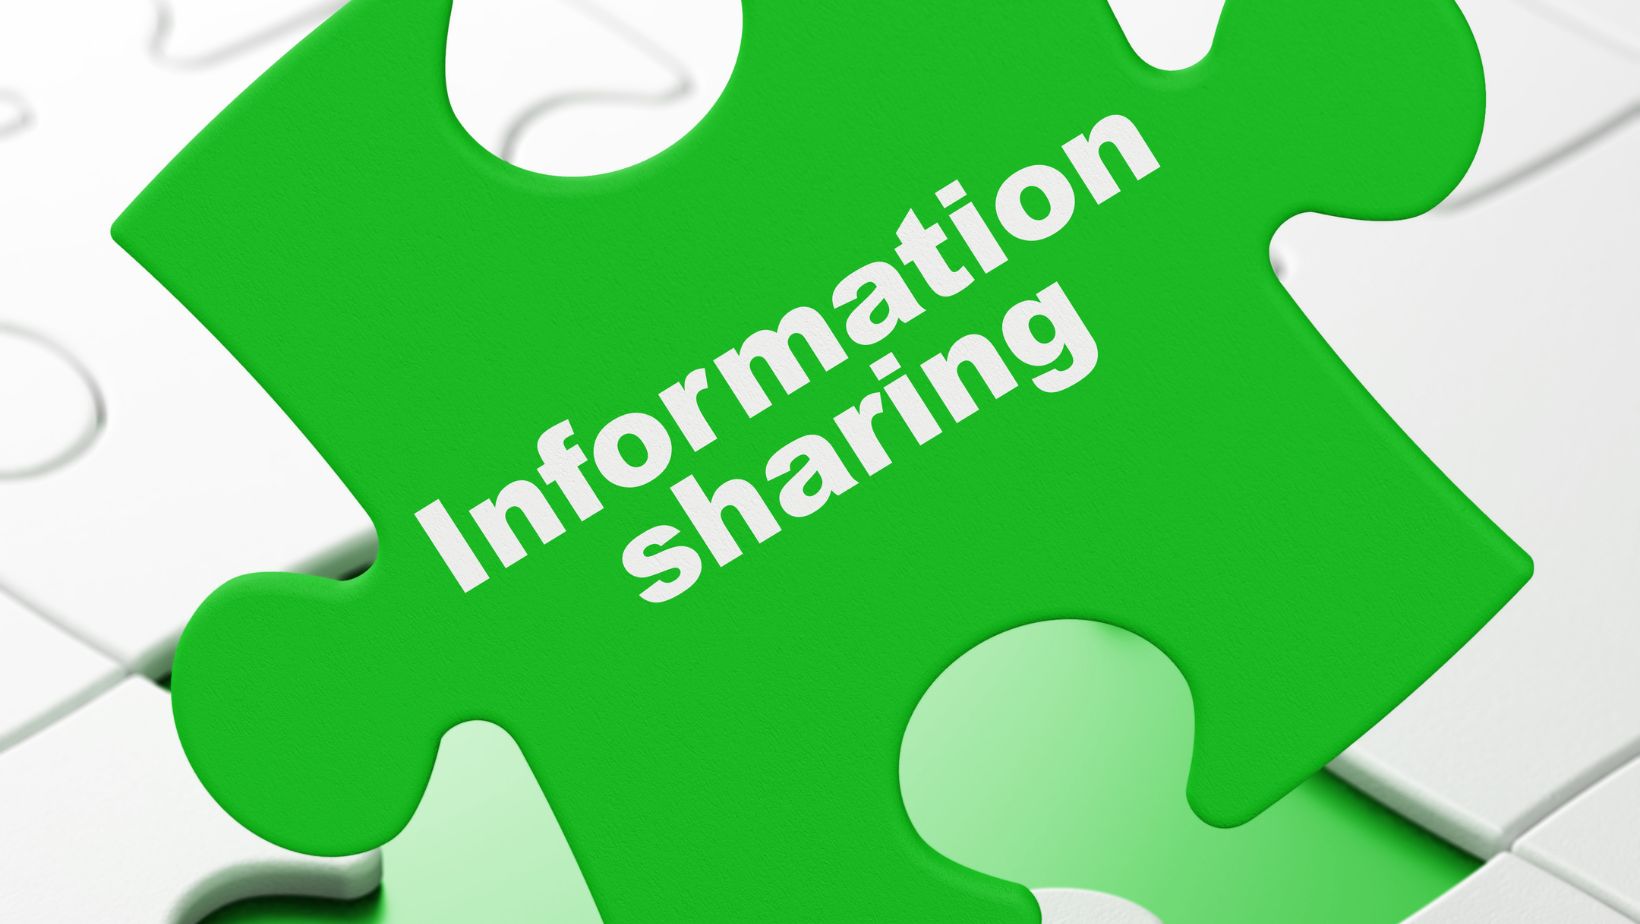 all of the following are ways to promote the sharing of information within the federal government